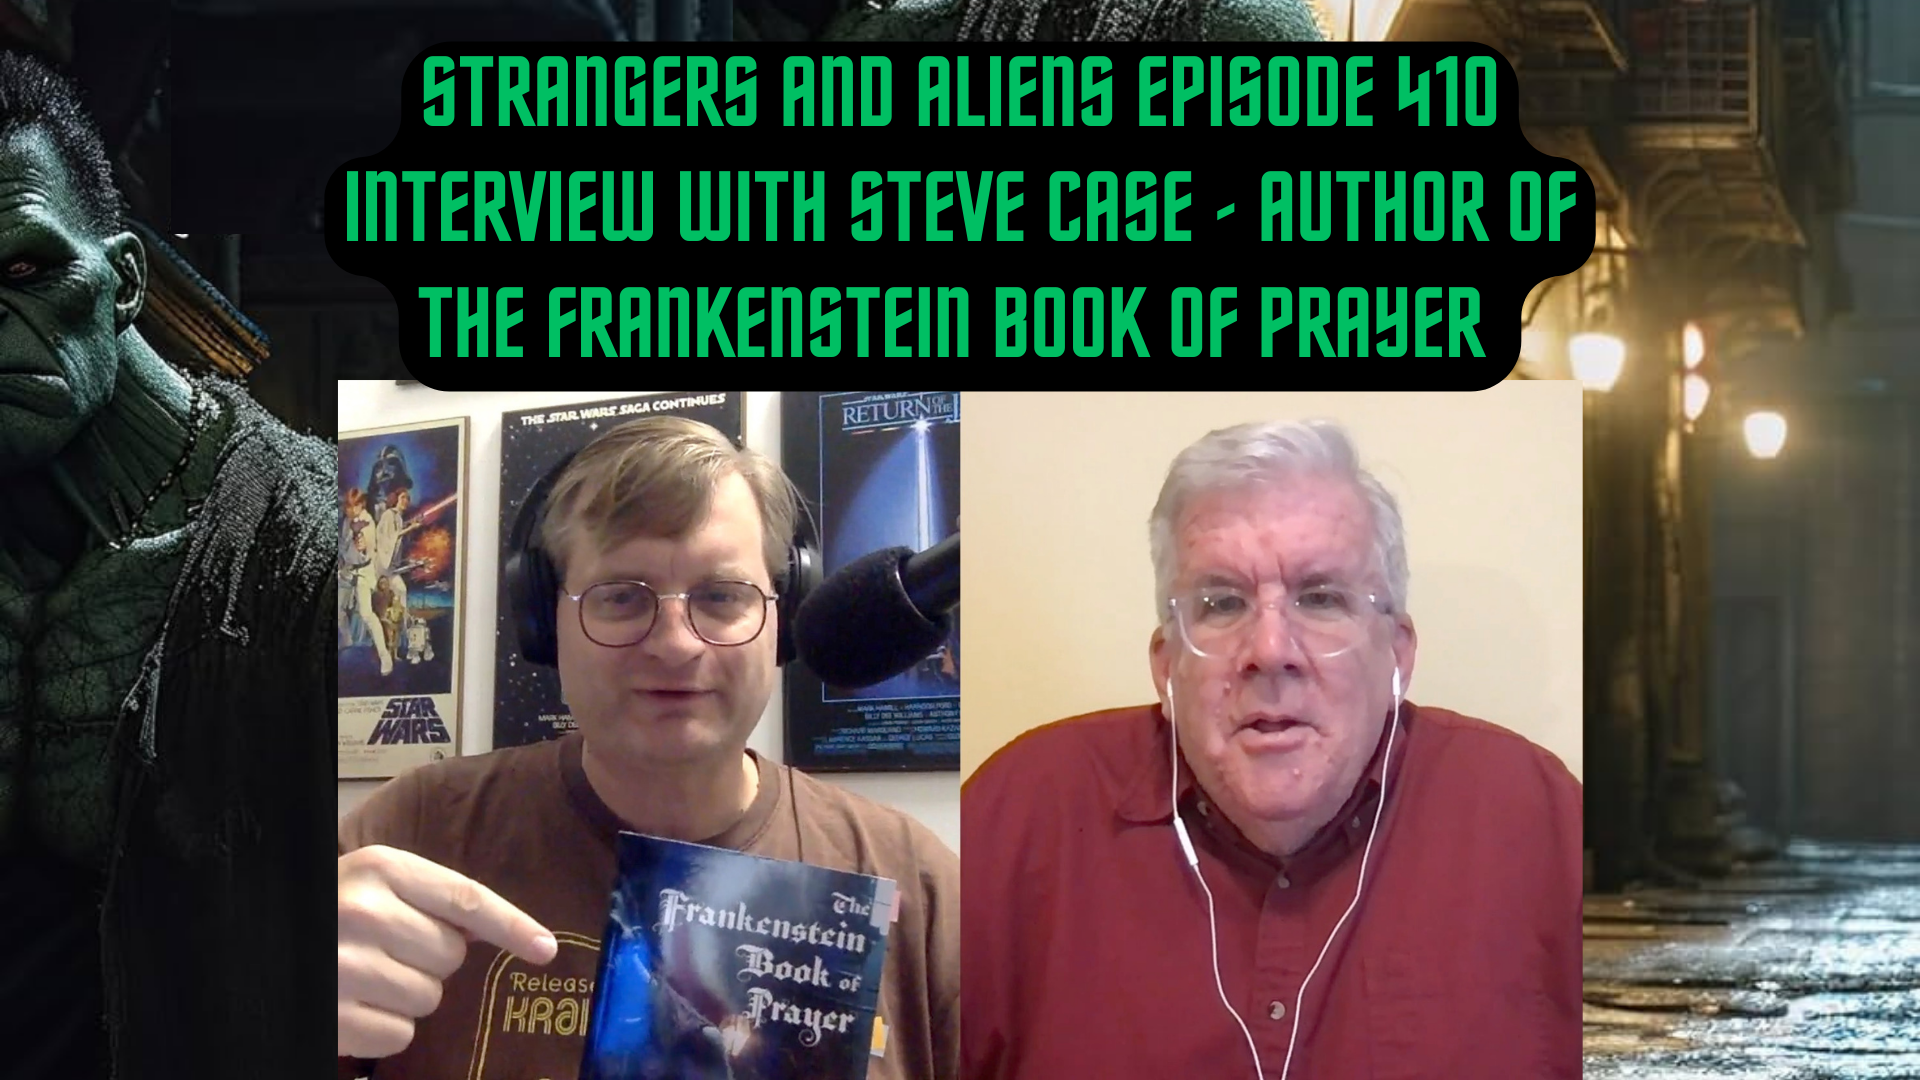 THE FRANKENSTEIN BOOK OF PRAYER – Interview with Author Steve Case – SA410